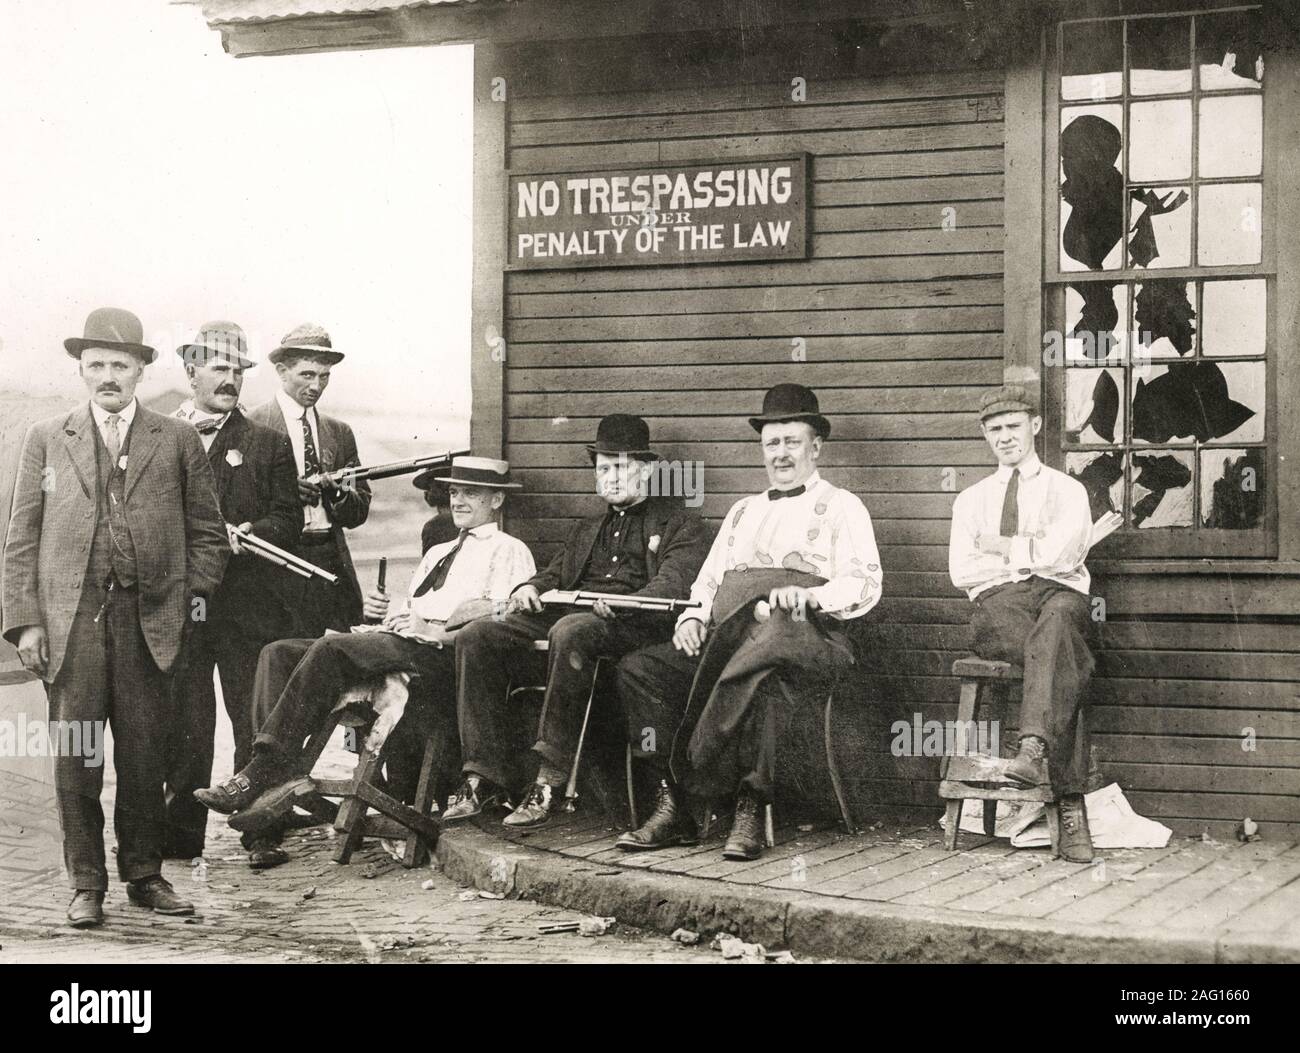 Early 20th century vintage press photograph - upholding the law in the USA in the 1920s - group of men with shotguns and other weapons Stock Photo